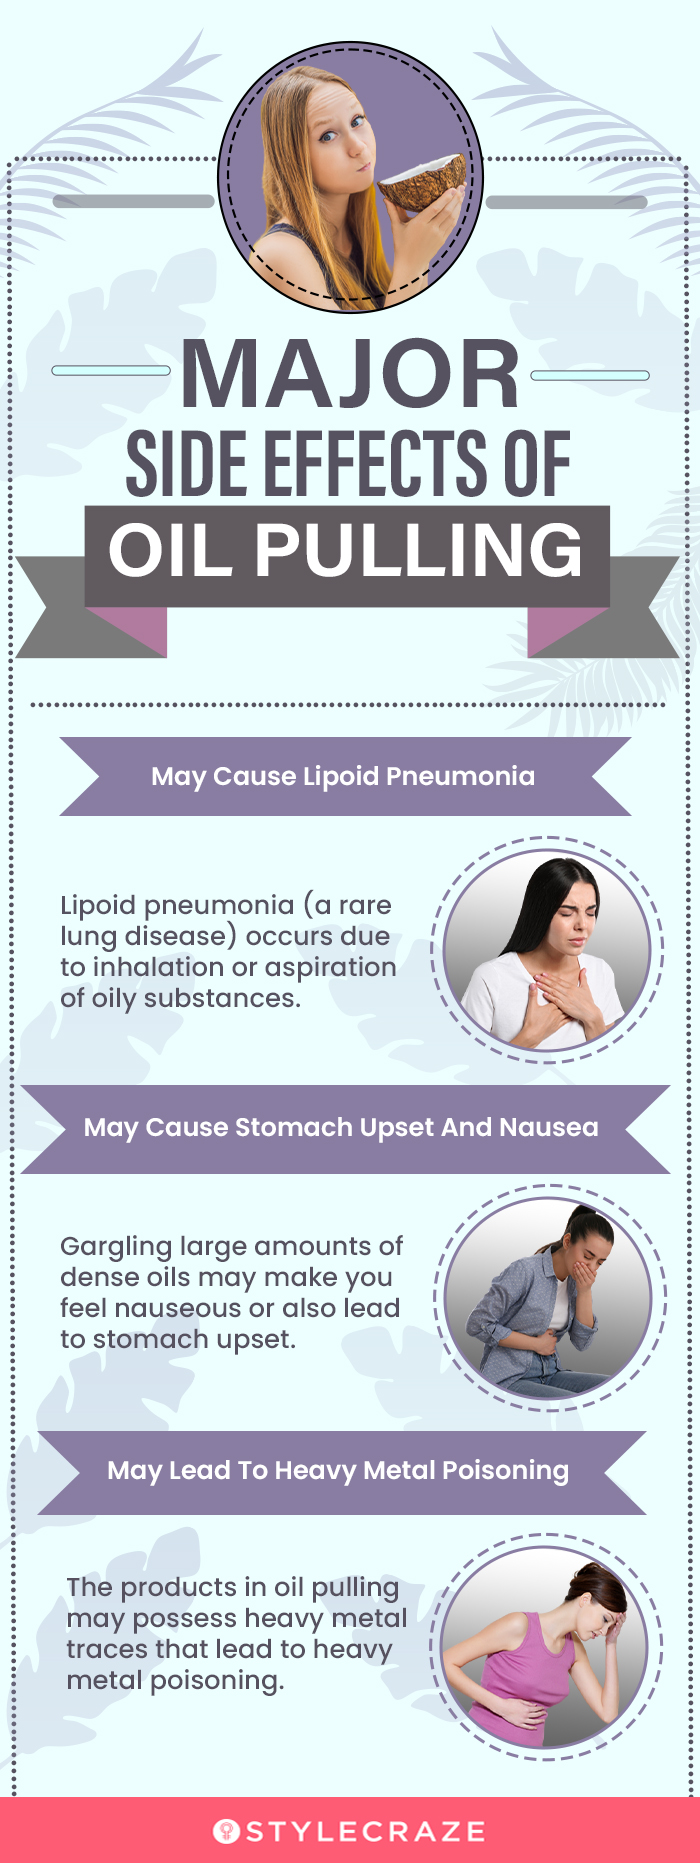 major side effects of oil pulling [infographic]